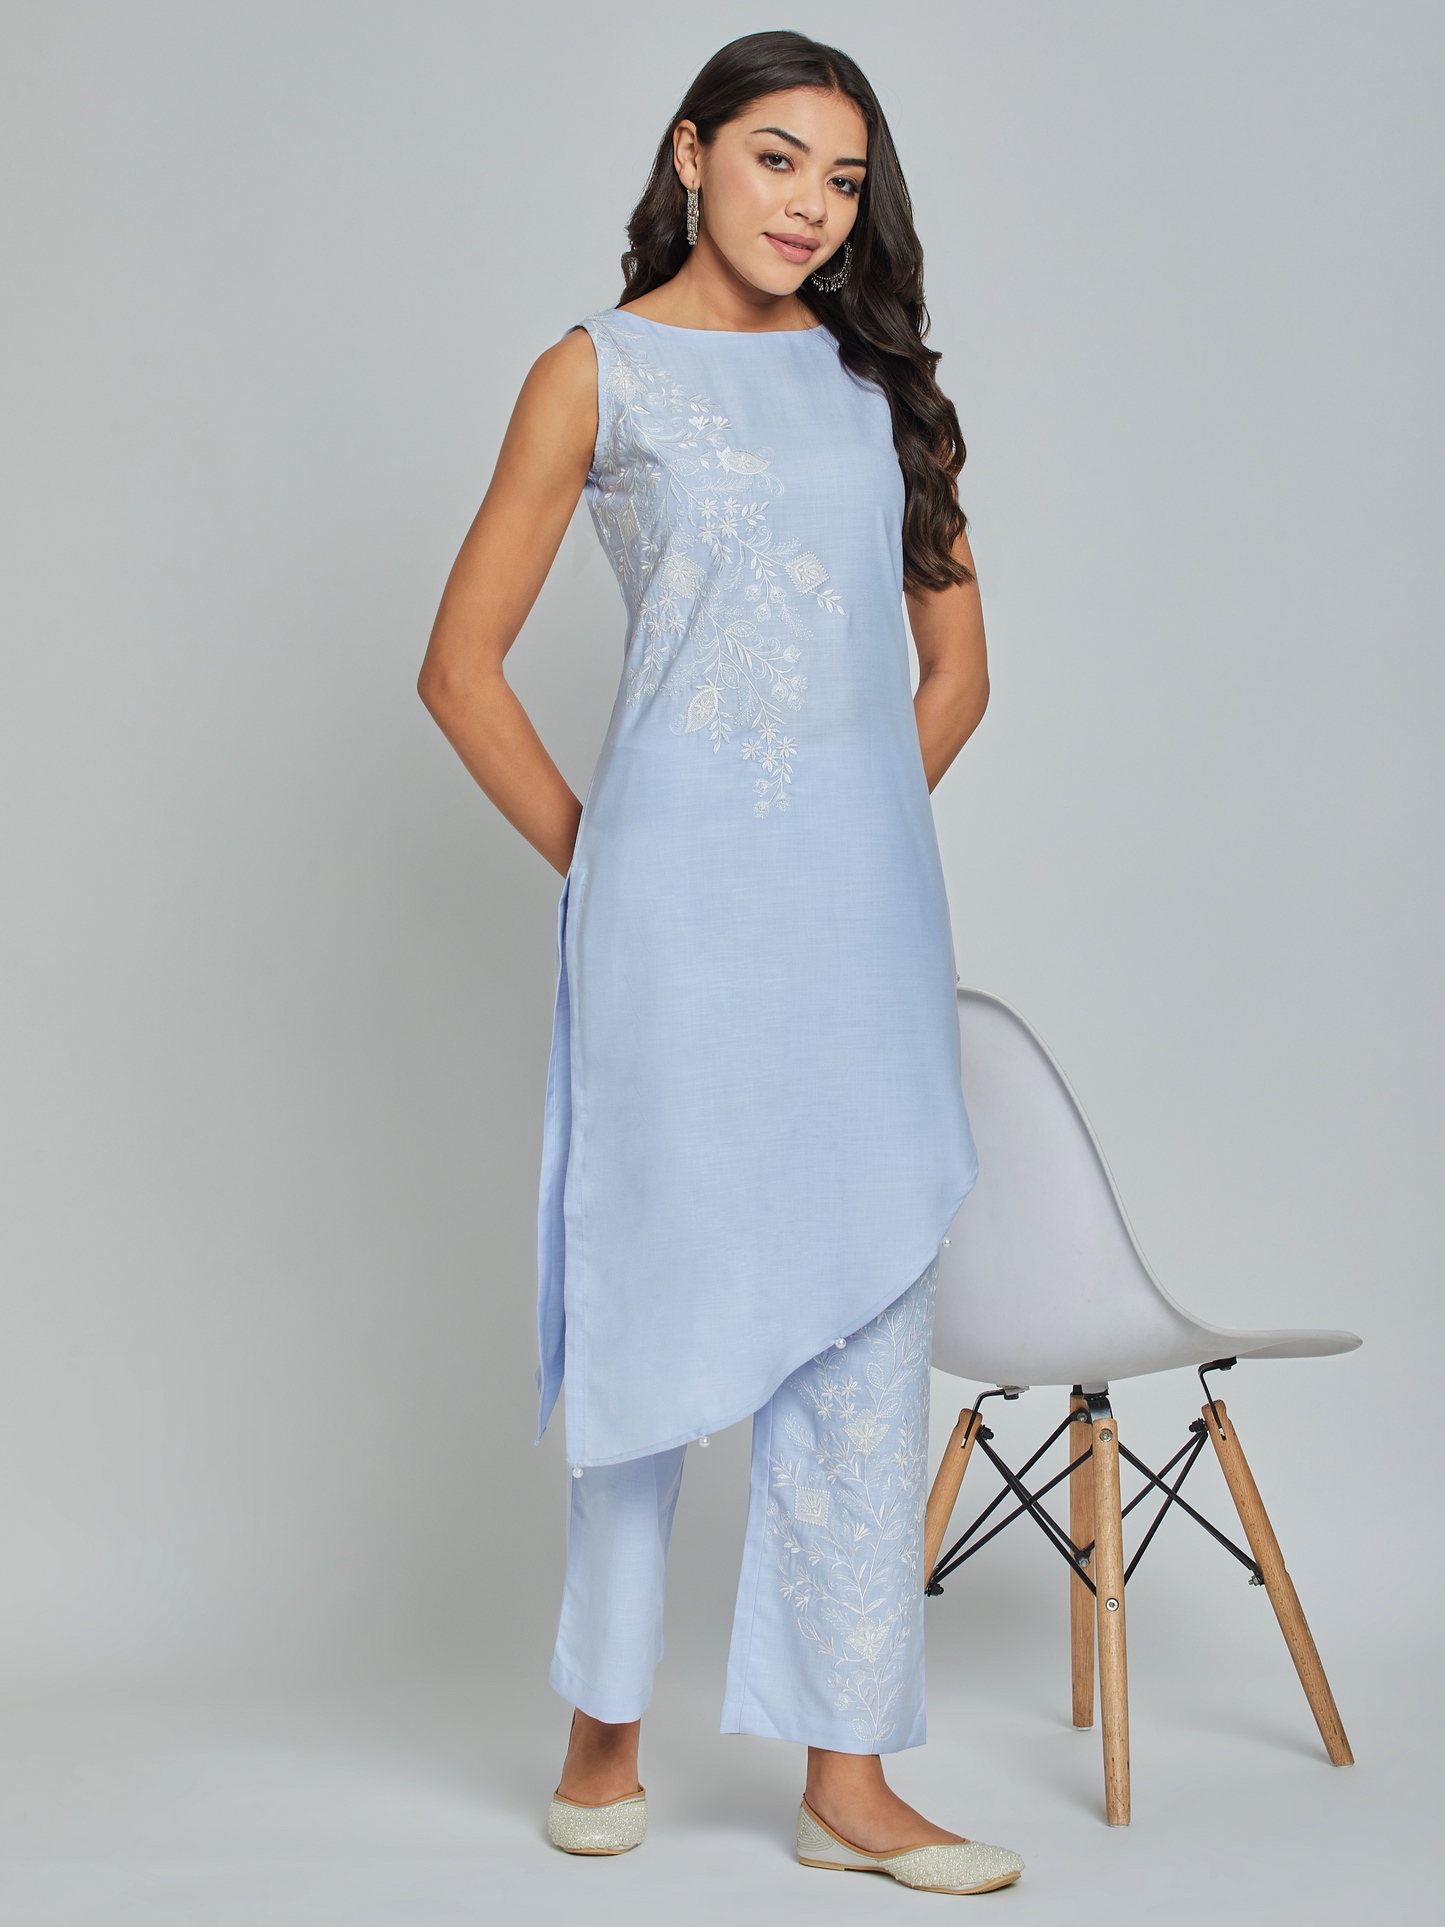 Periwinkle Embroidered Coordinate Set